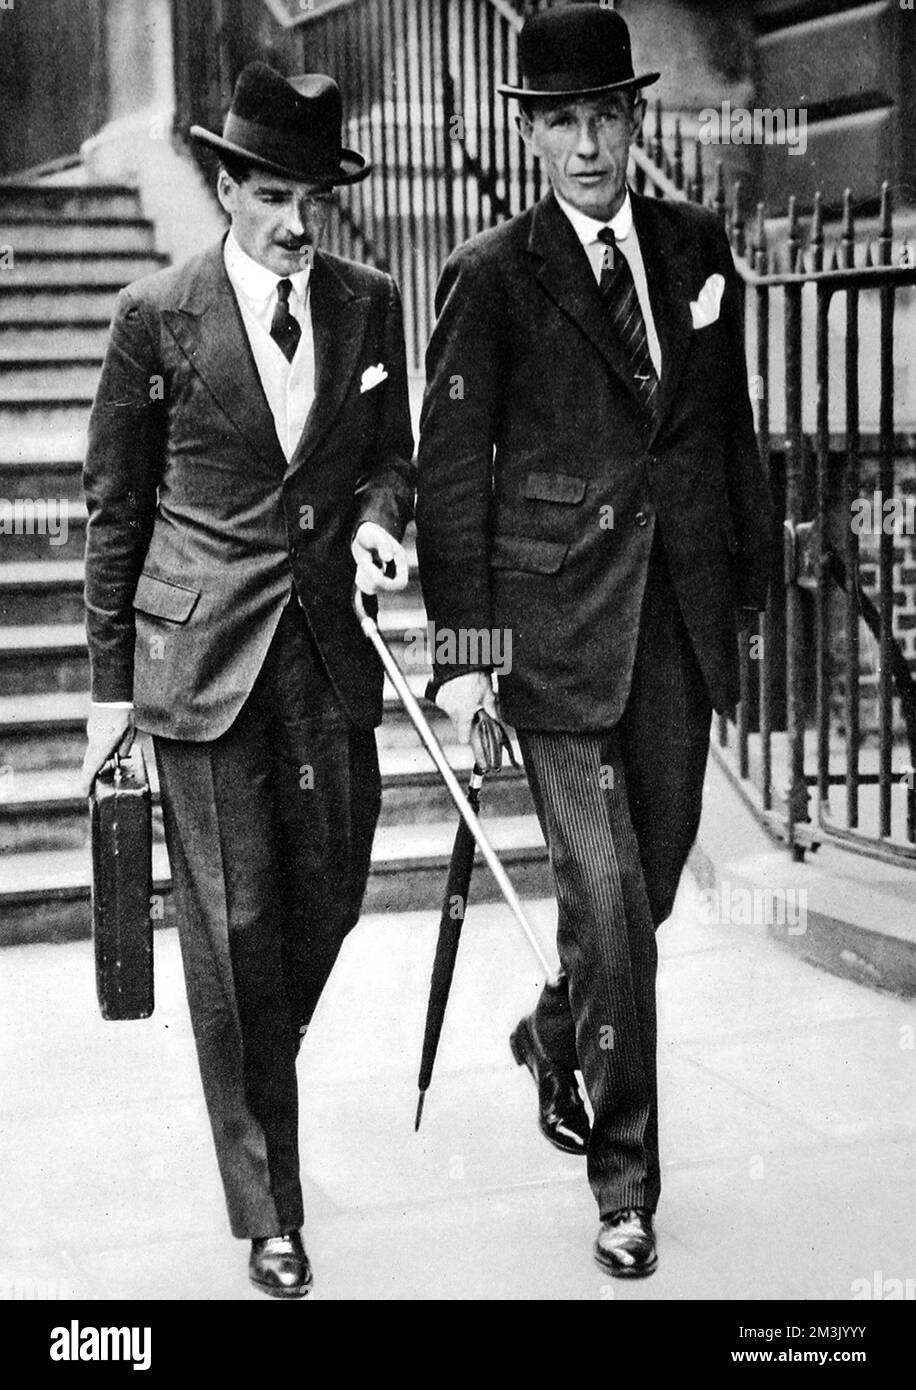 Anthony Eden (on left) (1897 - 1977) and Viscount Halifax (1881 - 1959) in London. Halifax had just replaced Eden as Foreign Secretary, after Eden's resignation from Chamberlain's cabinet over differences in belief regarding British policy towards Fascist Italy.  1938 Stock Photo